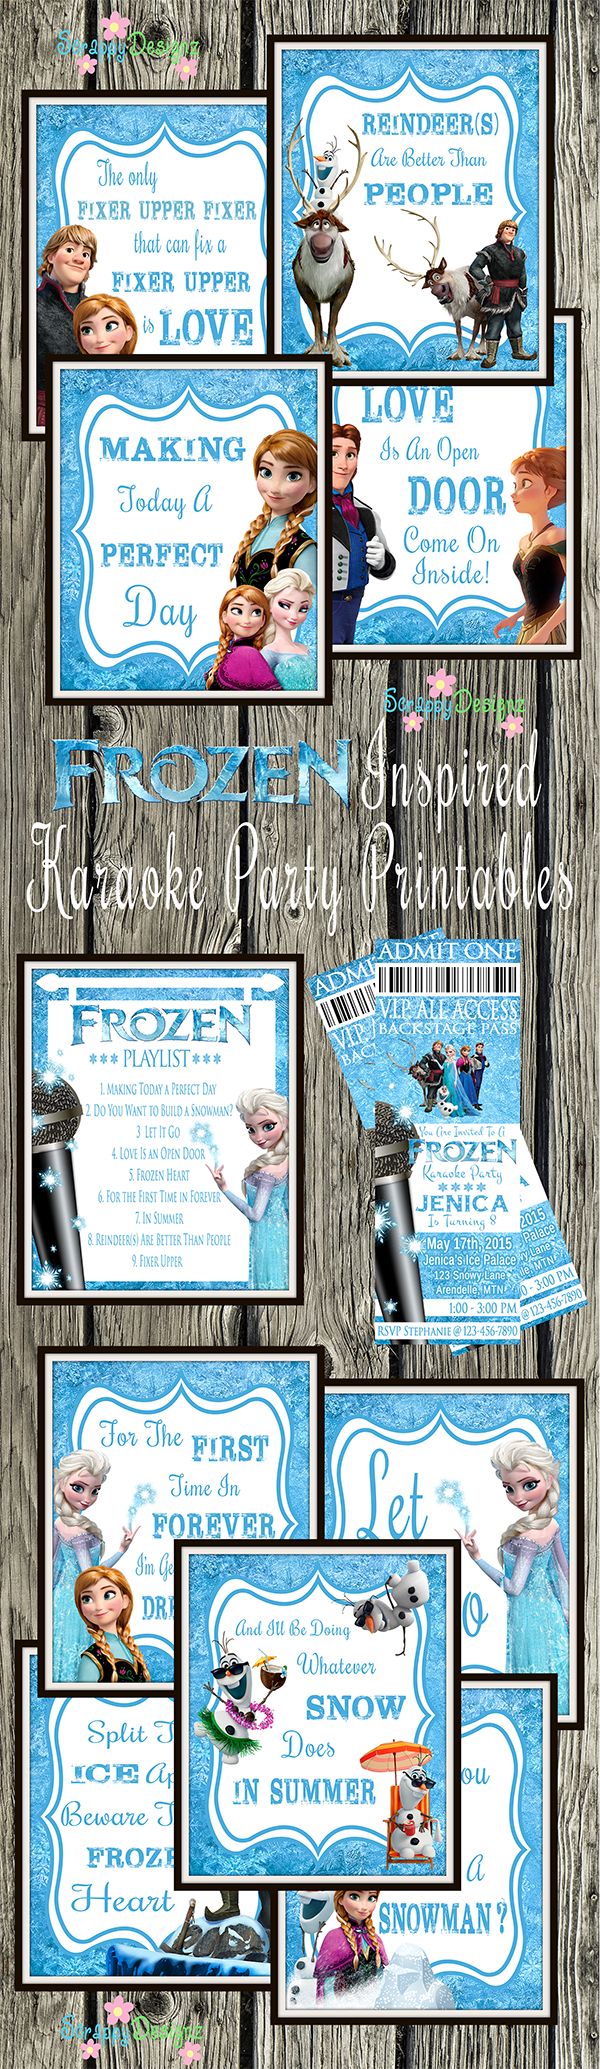 Frozen Inspired Karaoke Party Printables – Includes (10) 8″ x 10″ posters, one f… Wallpaper